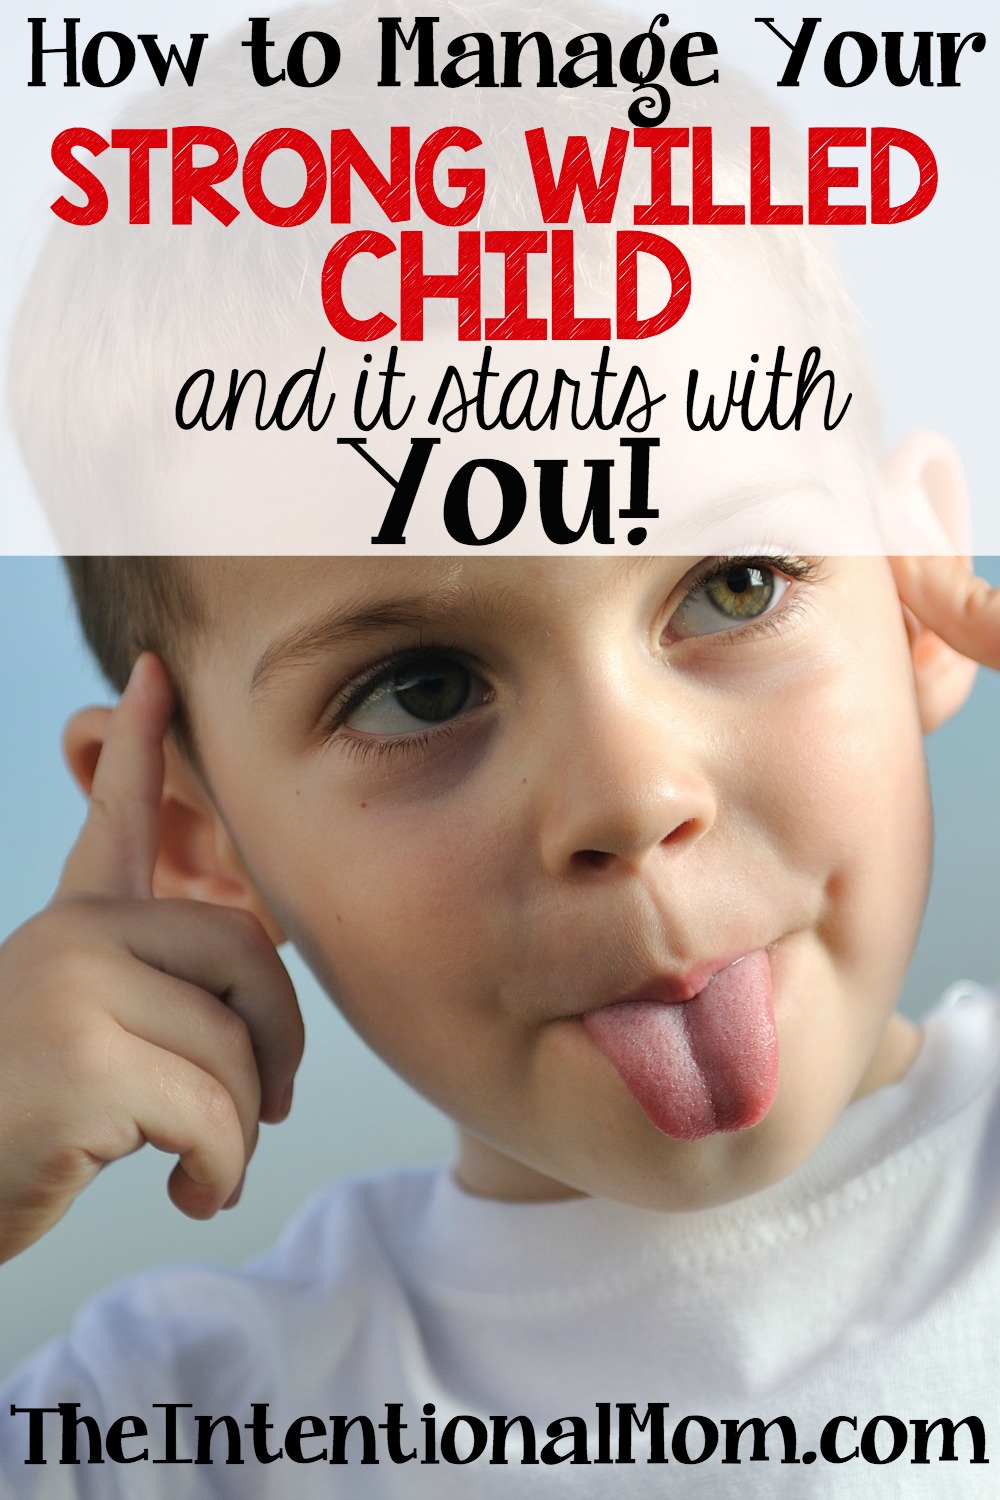 How to Manage Your Strong Willed Child (and it starts with you!)